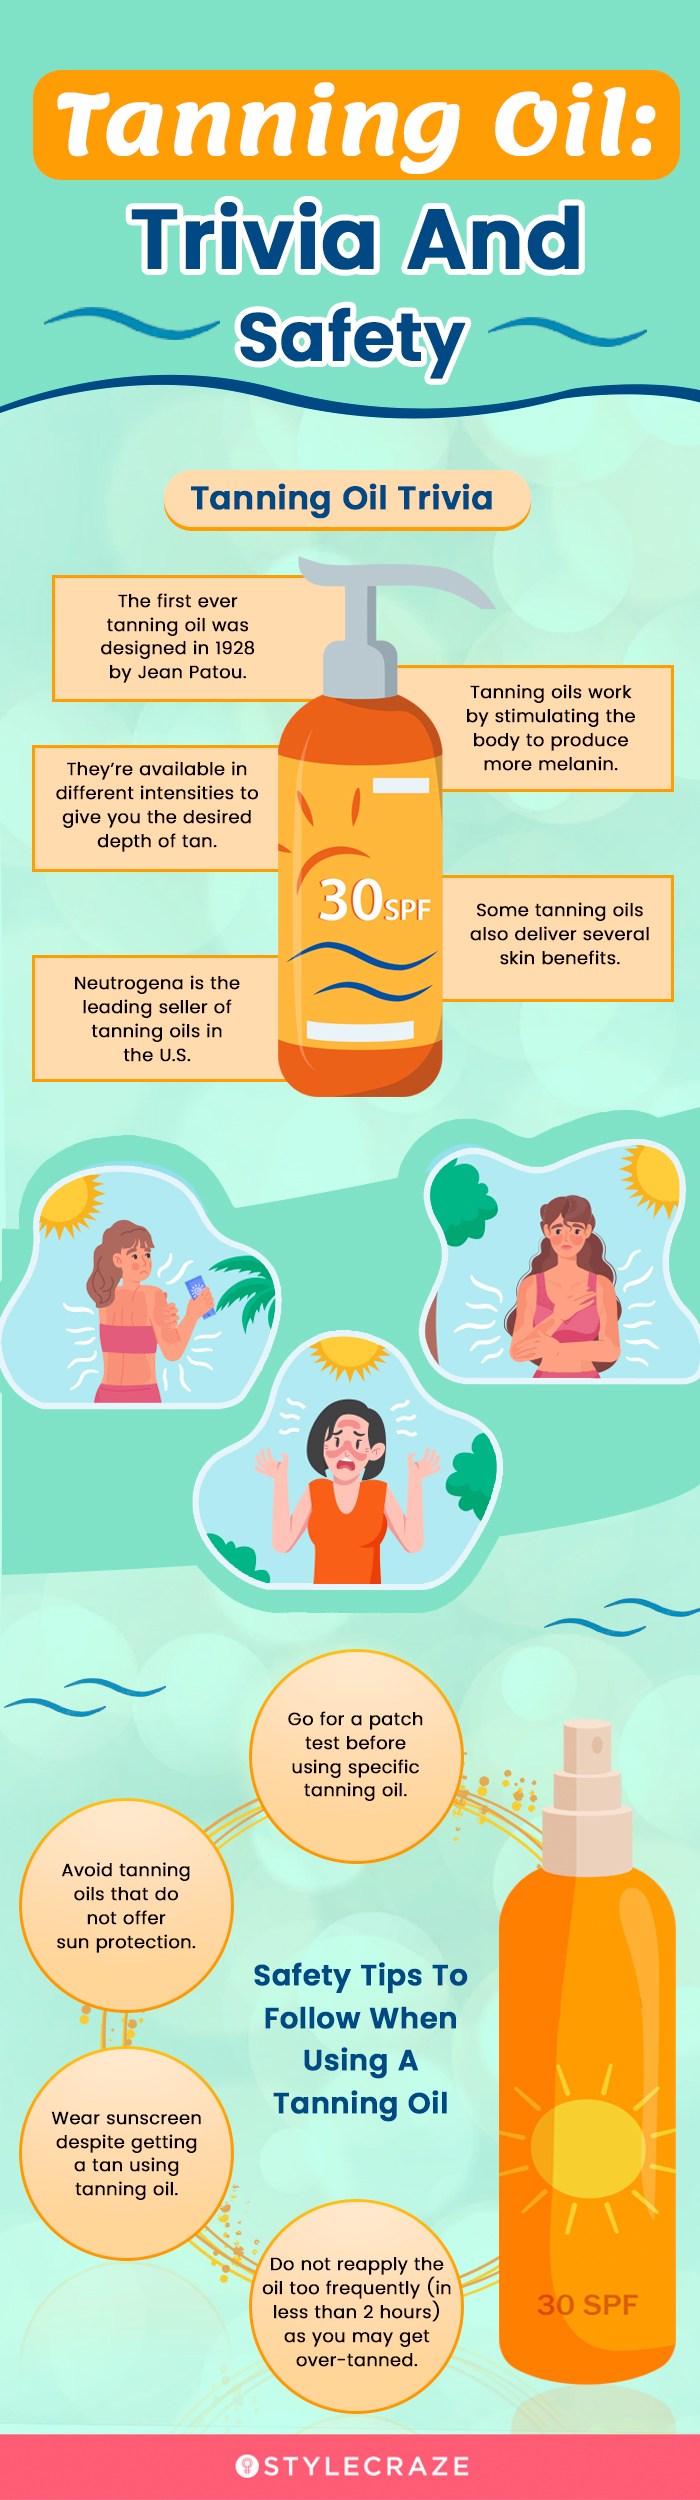 Tanning Oil: Trivia And Safety Tips [infographic]